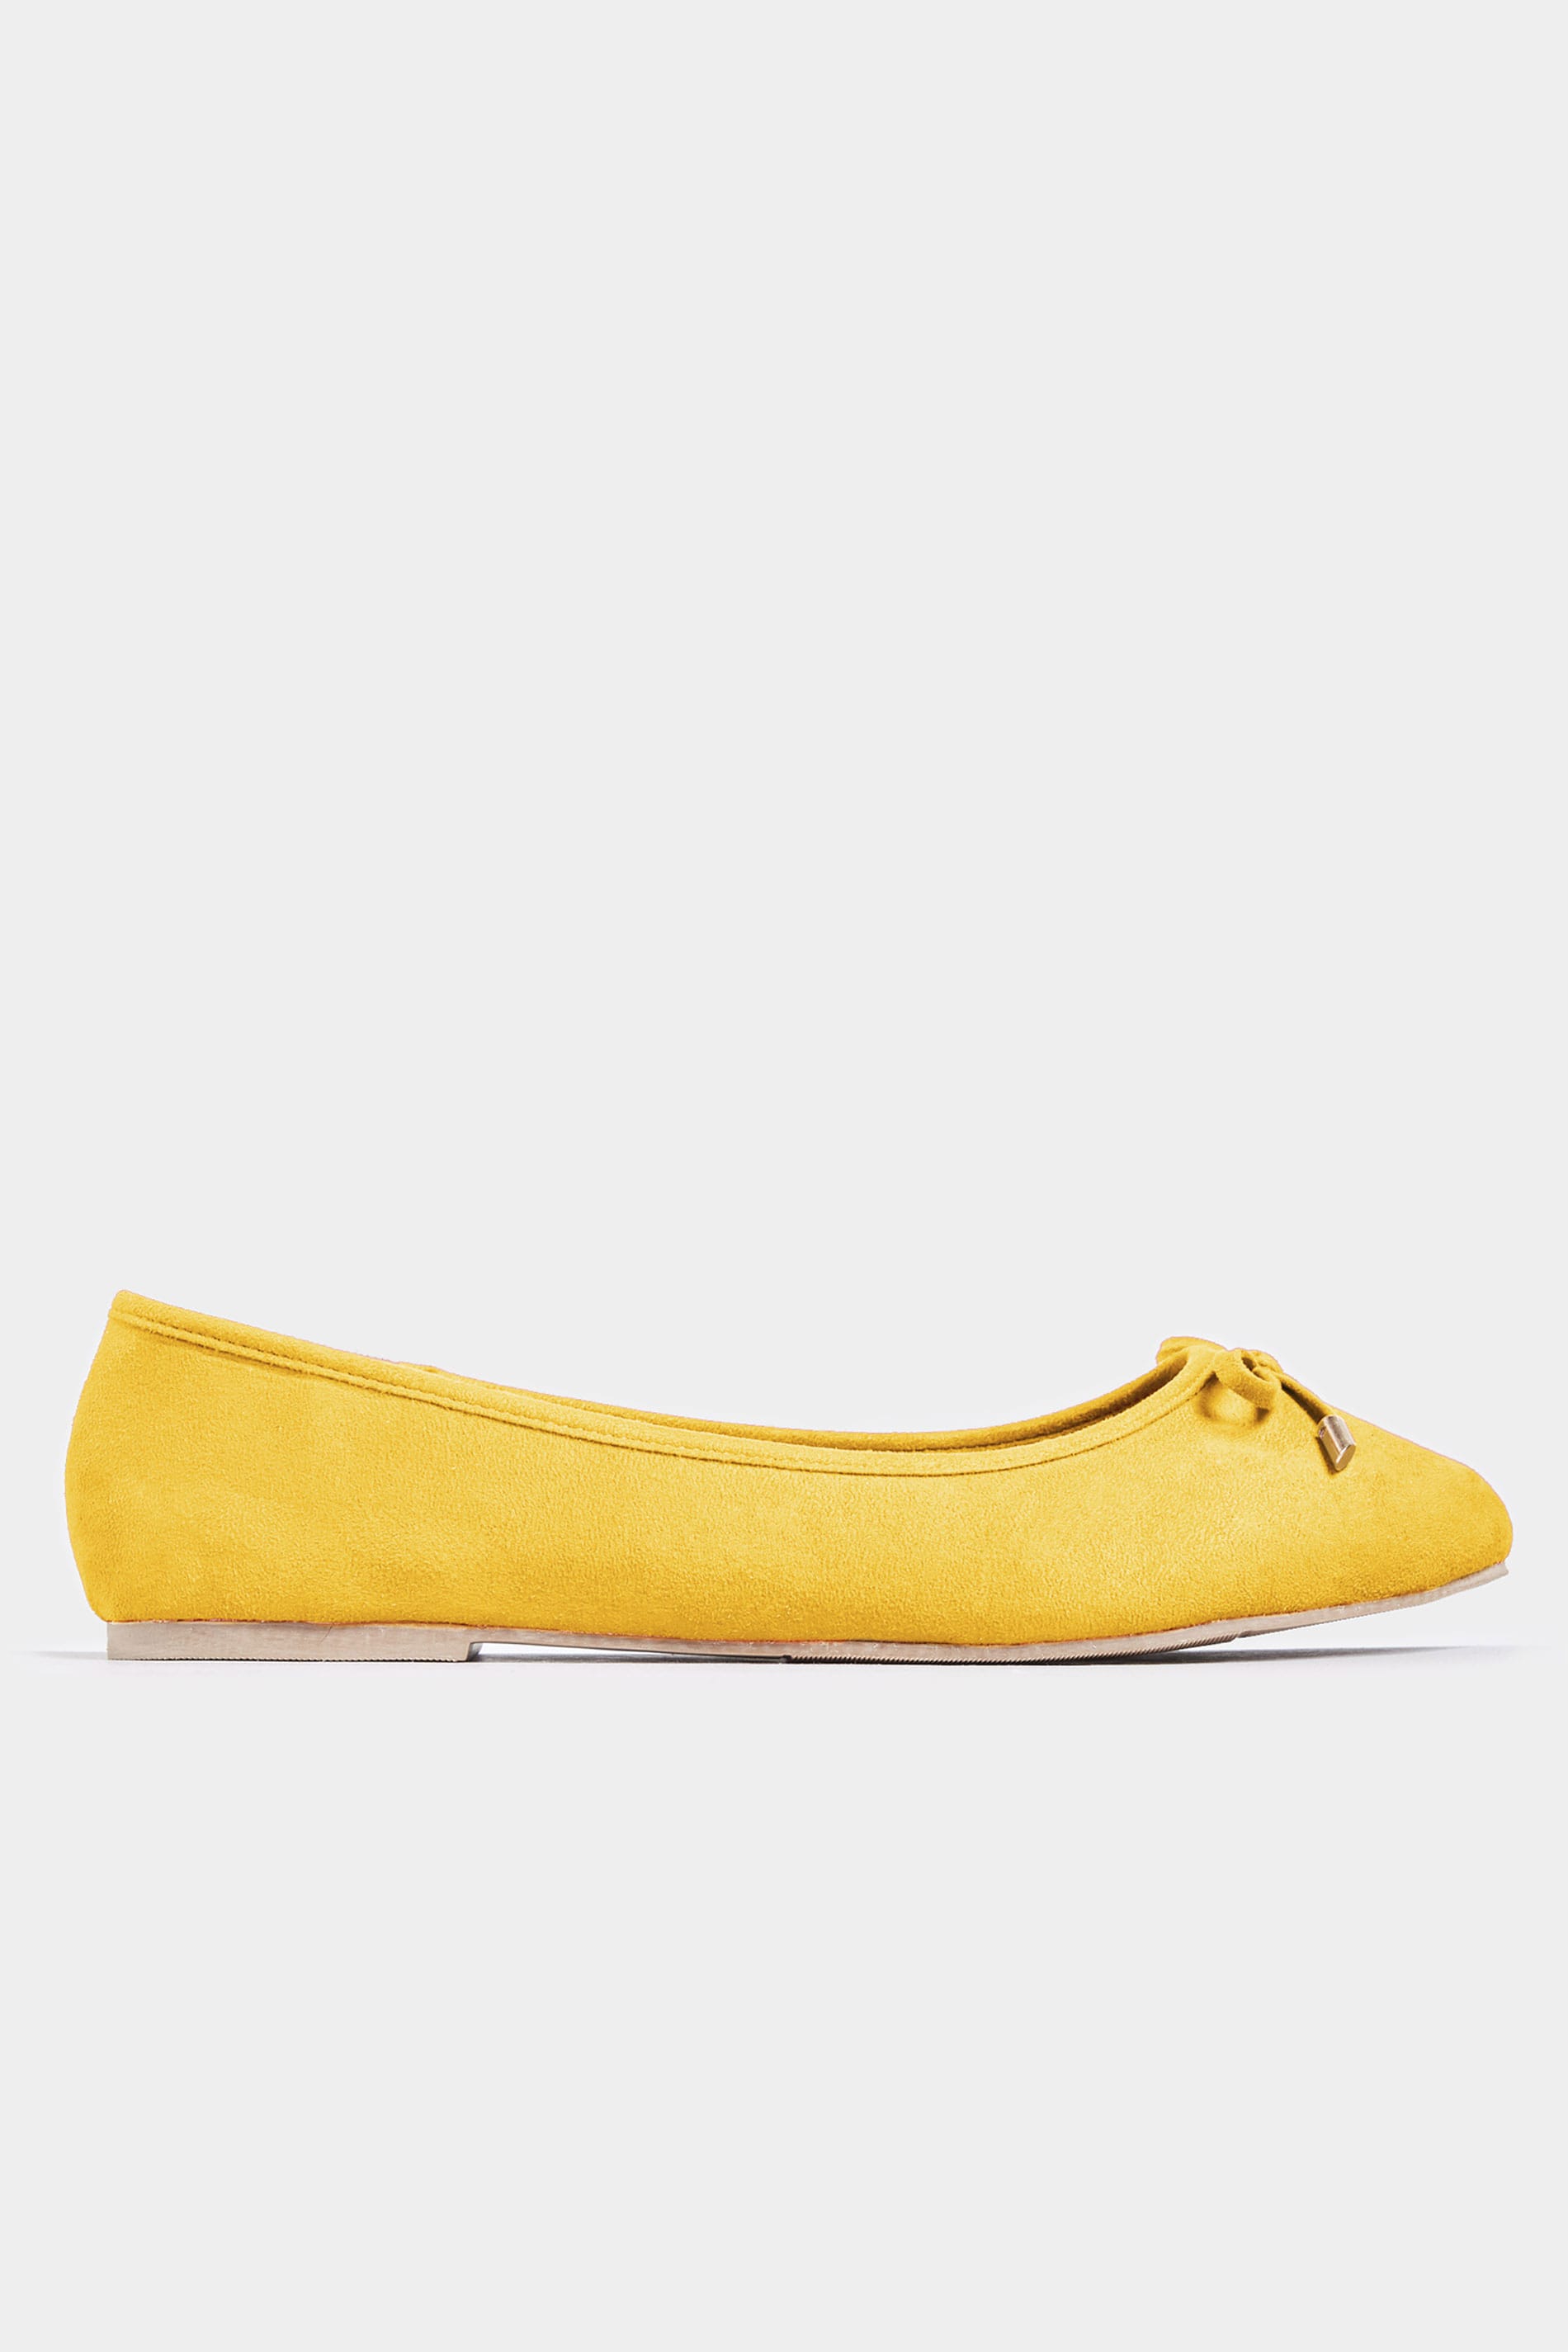 mustard shoes wide fit